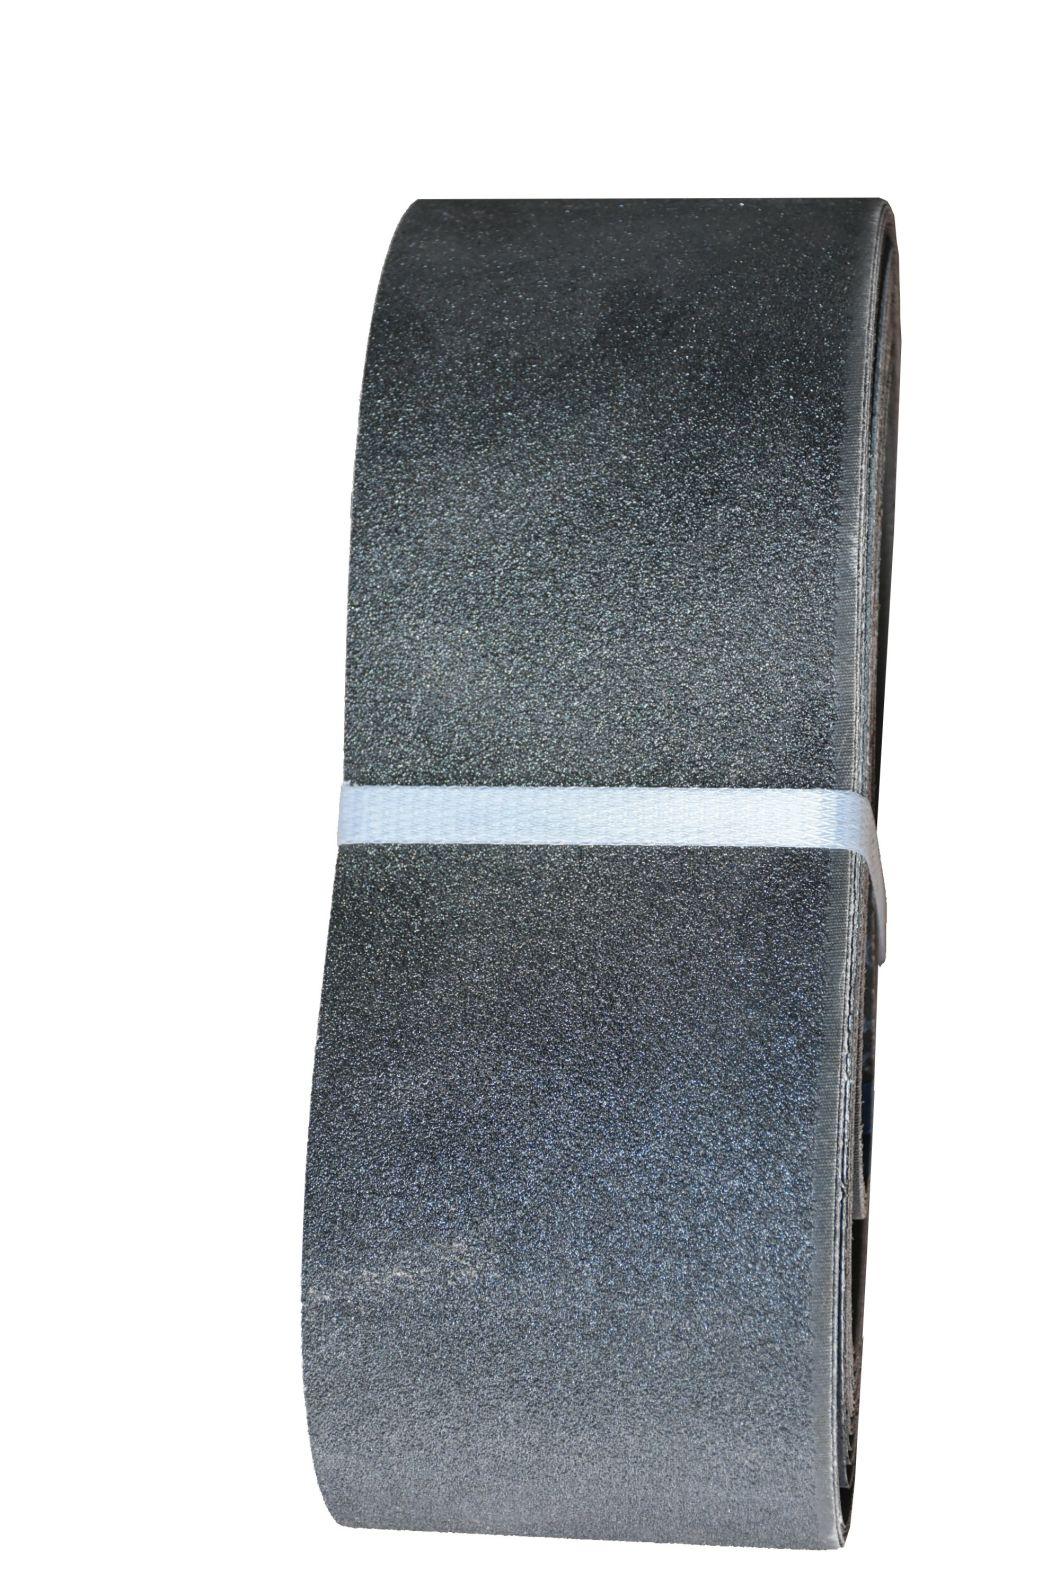 Available for Custom Abrasive Belt with Silicon Carbide